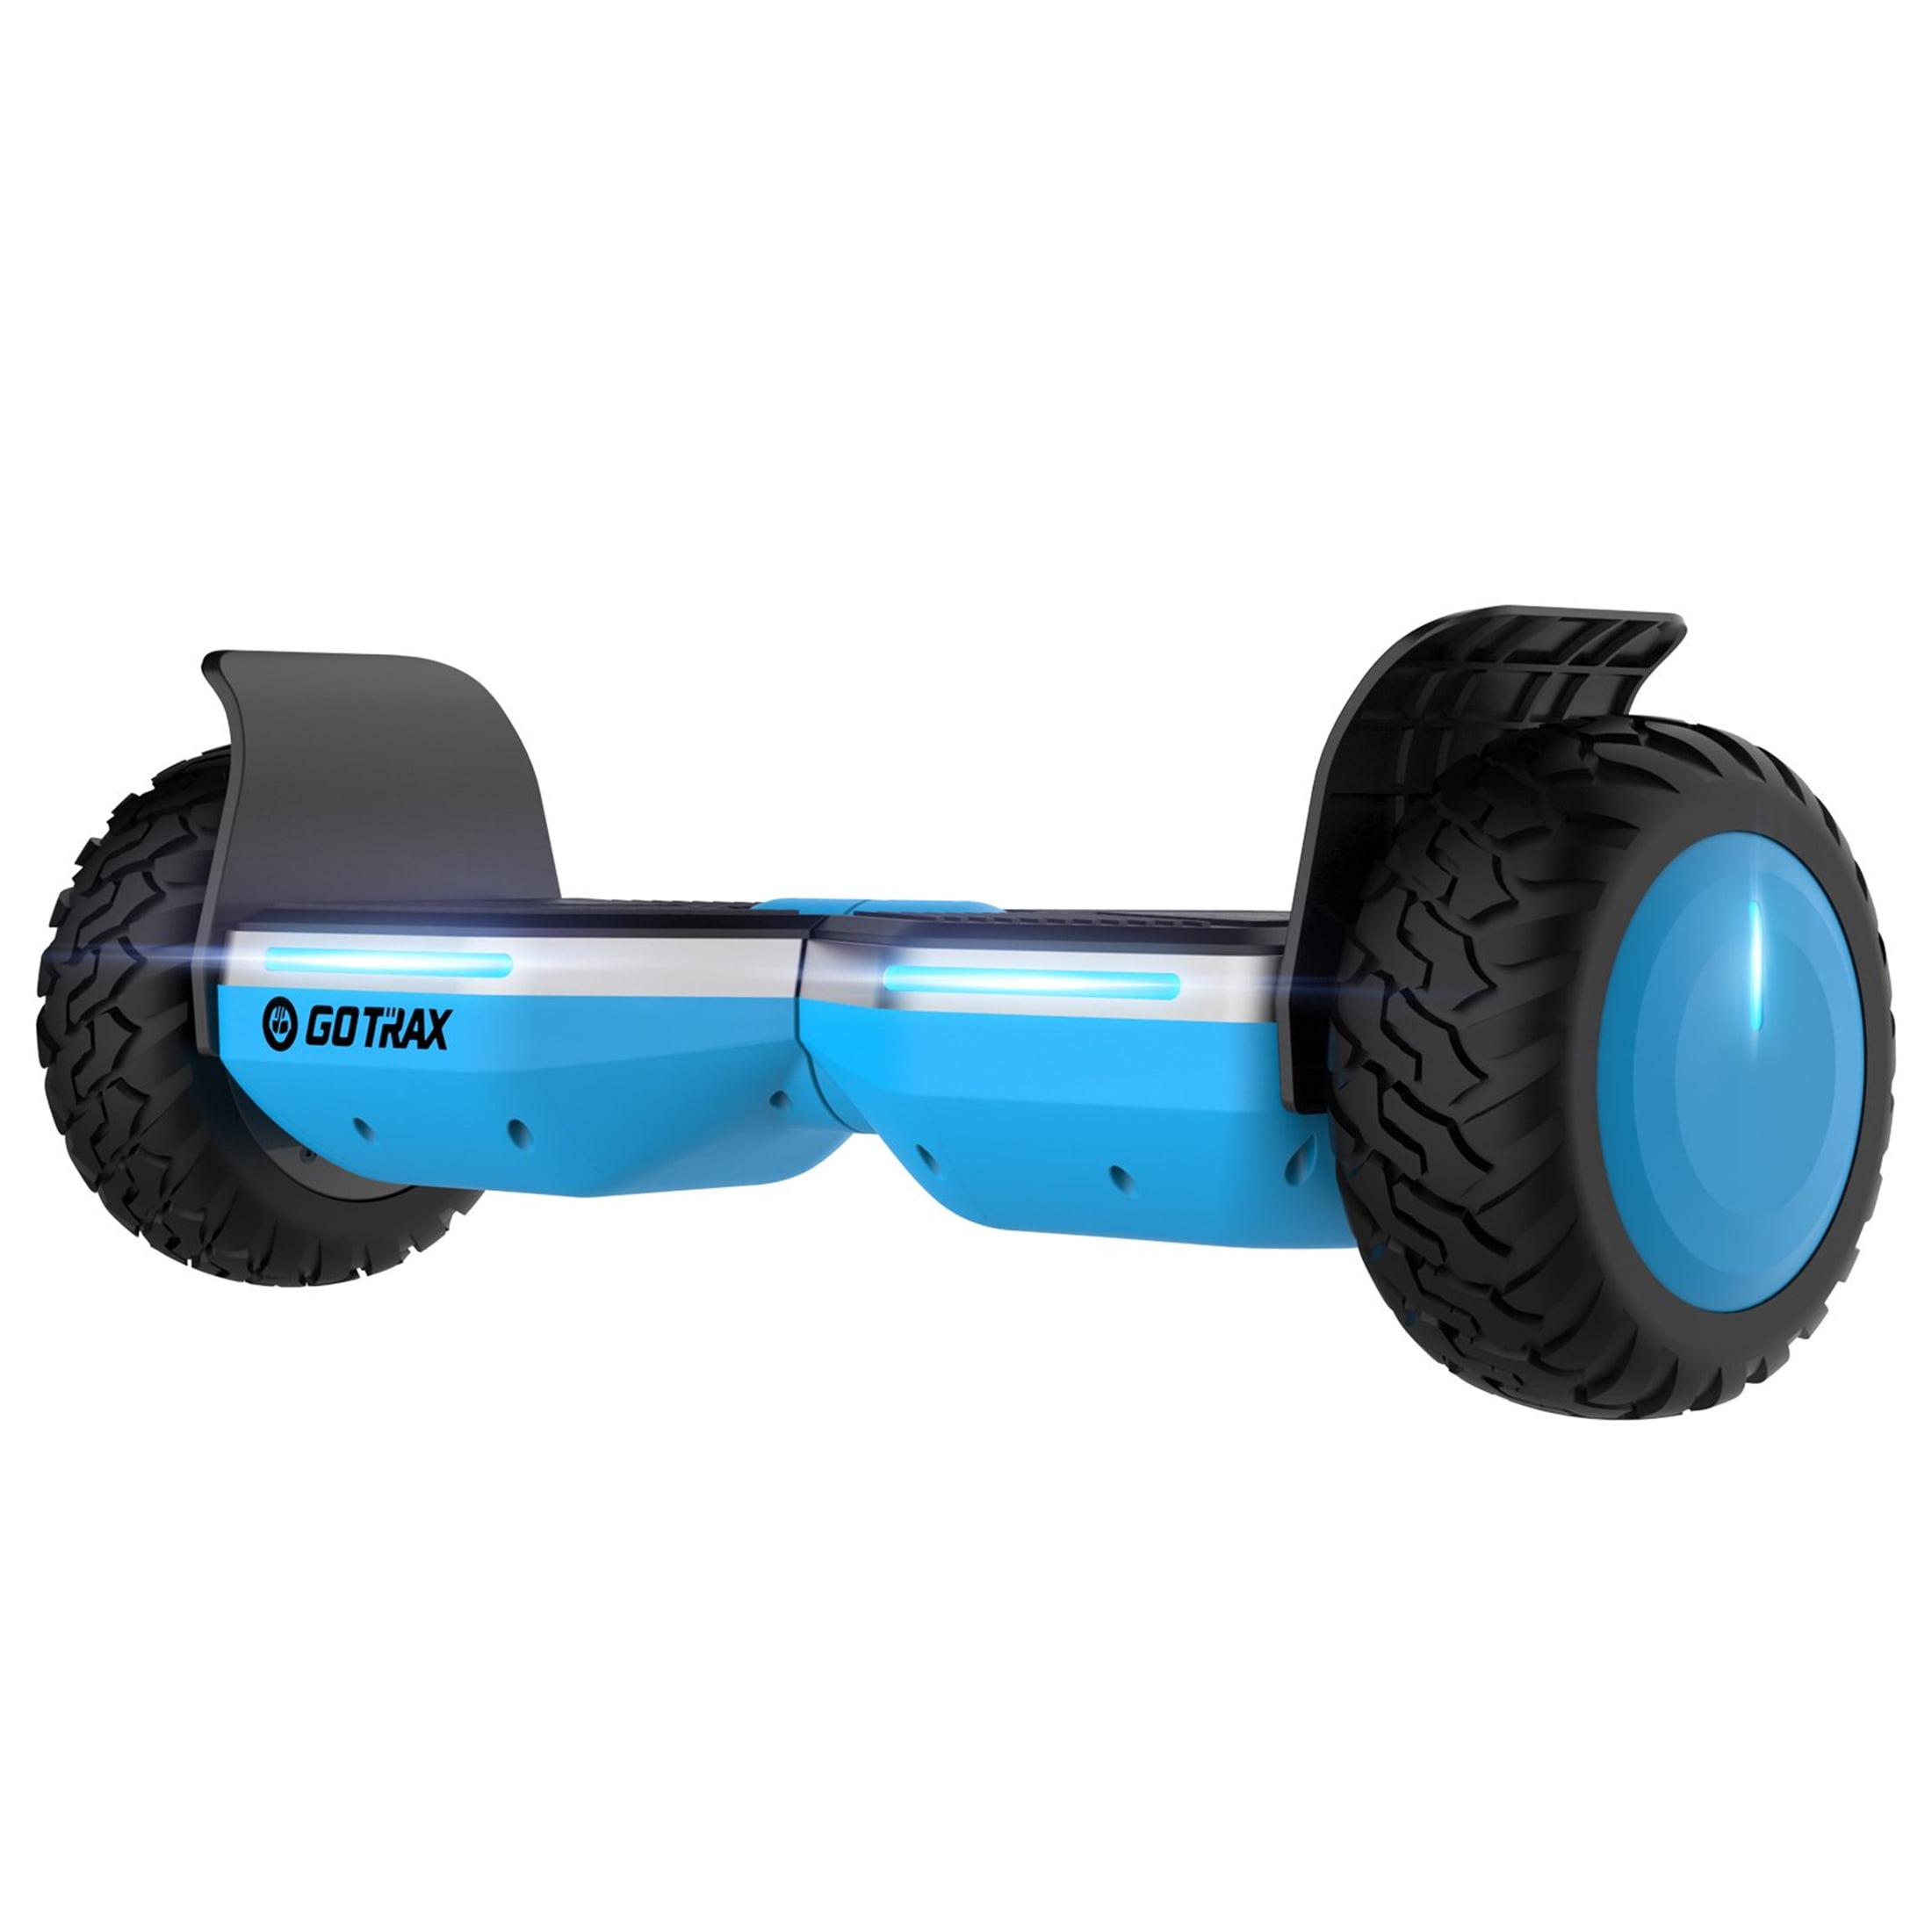 GOTRAX SRX PRO Bluetooth for Adult, 8.5" Off-road Tires Dual 250W Motor All Terrain Self Balancing Scooters for Up to 220lbs, Black - Walmart.com